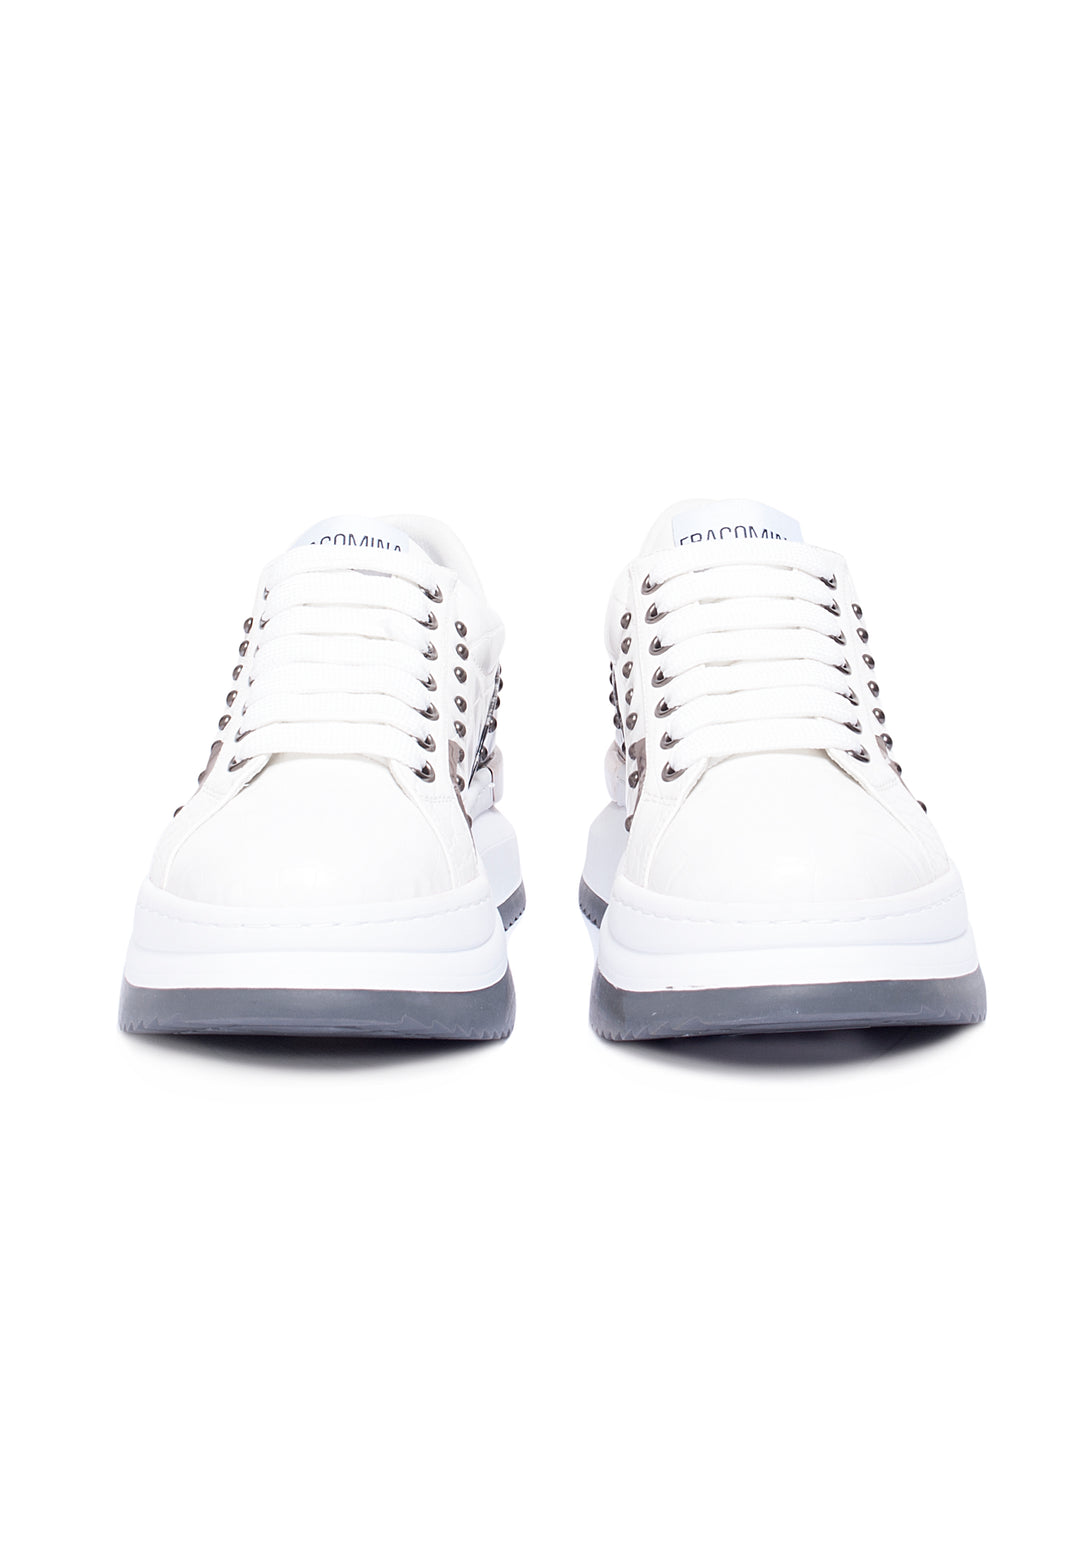 Sneakers made in eco leather with crocodile print